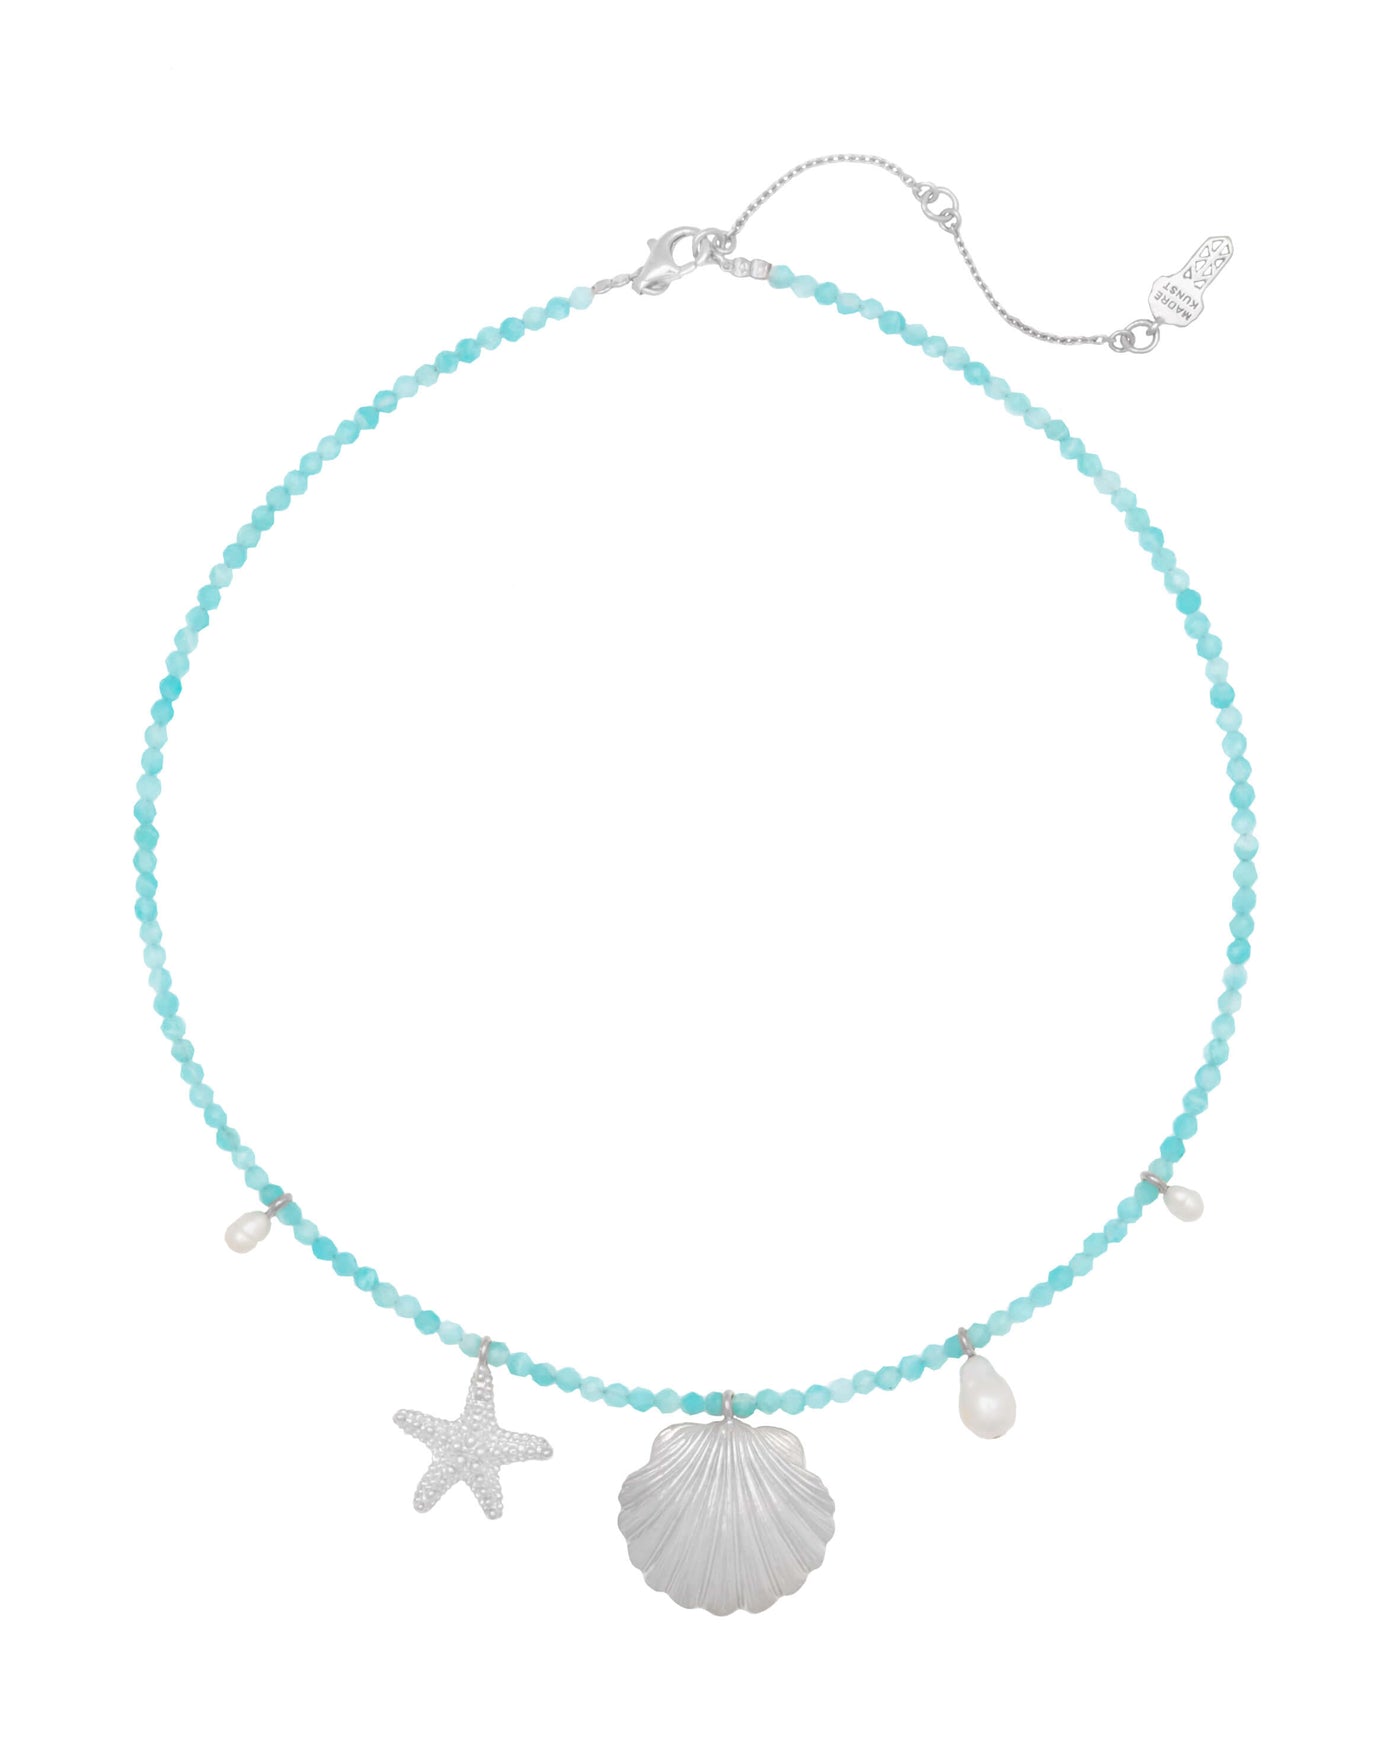 Clam shell with sea Star and pearls aquamarine choker. Silver